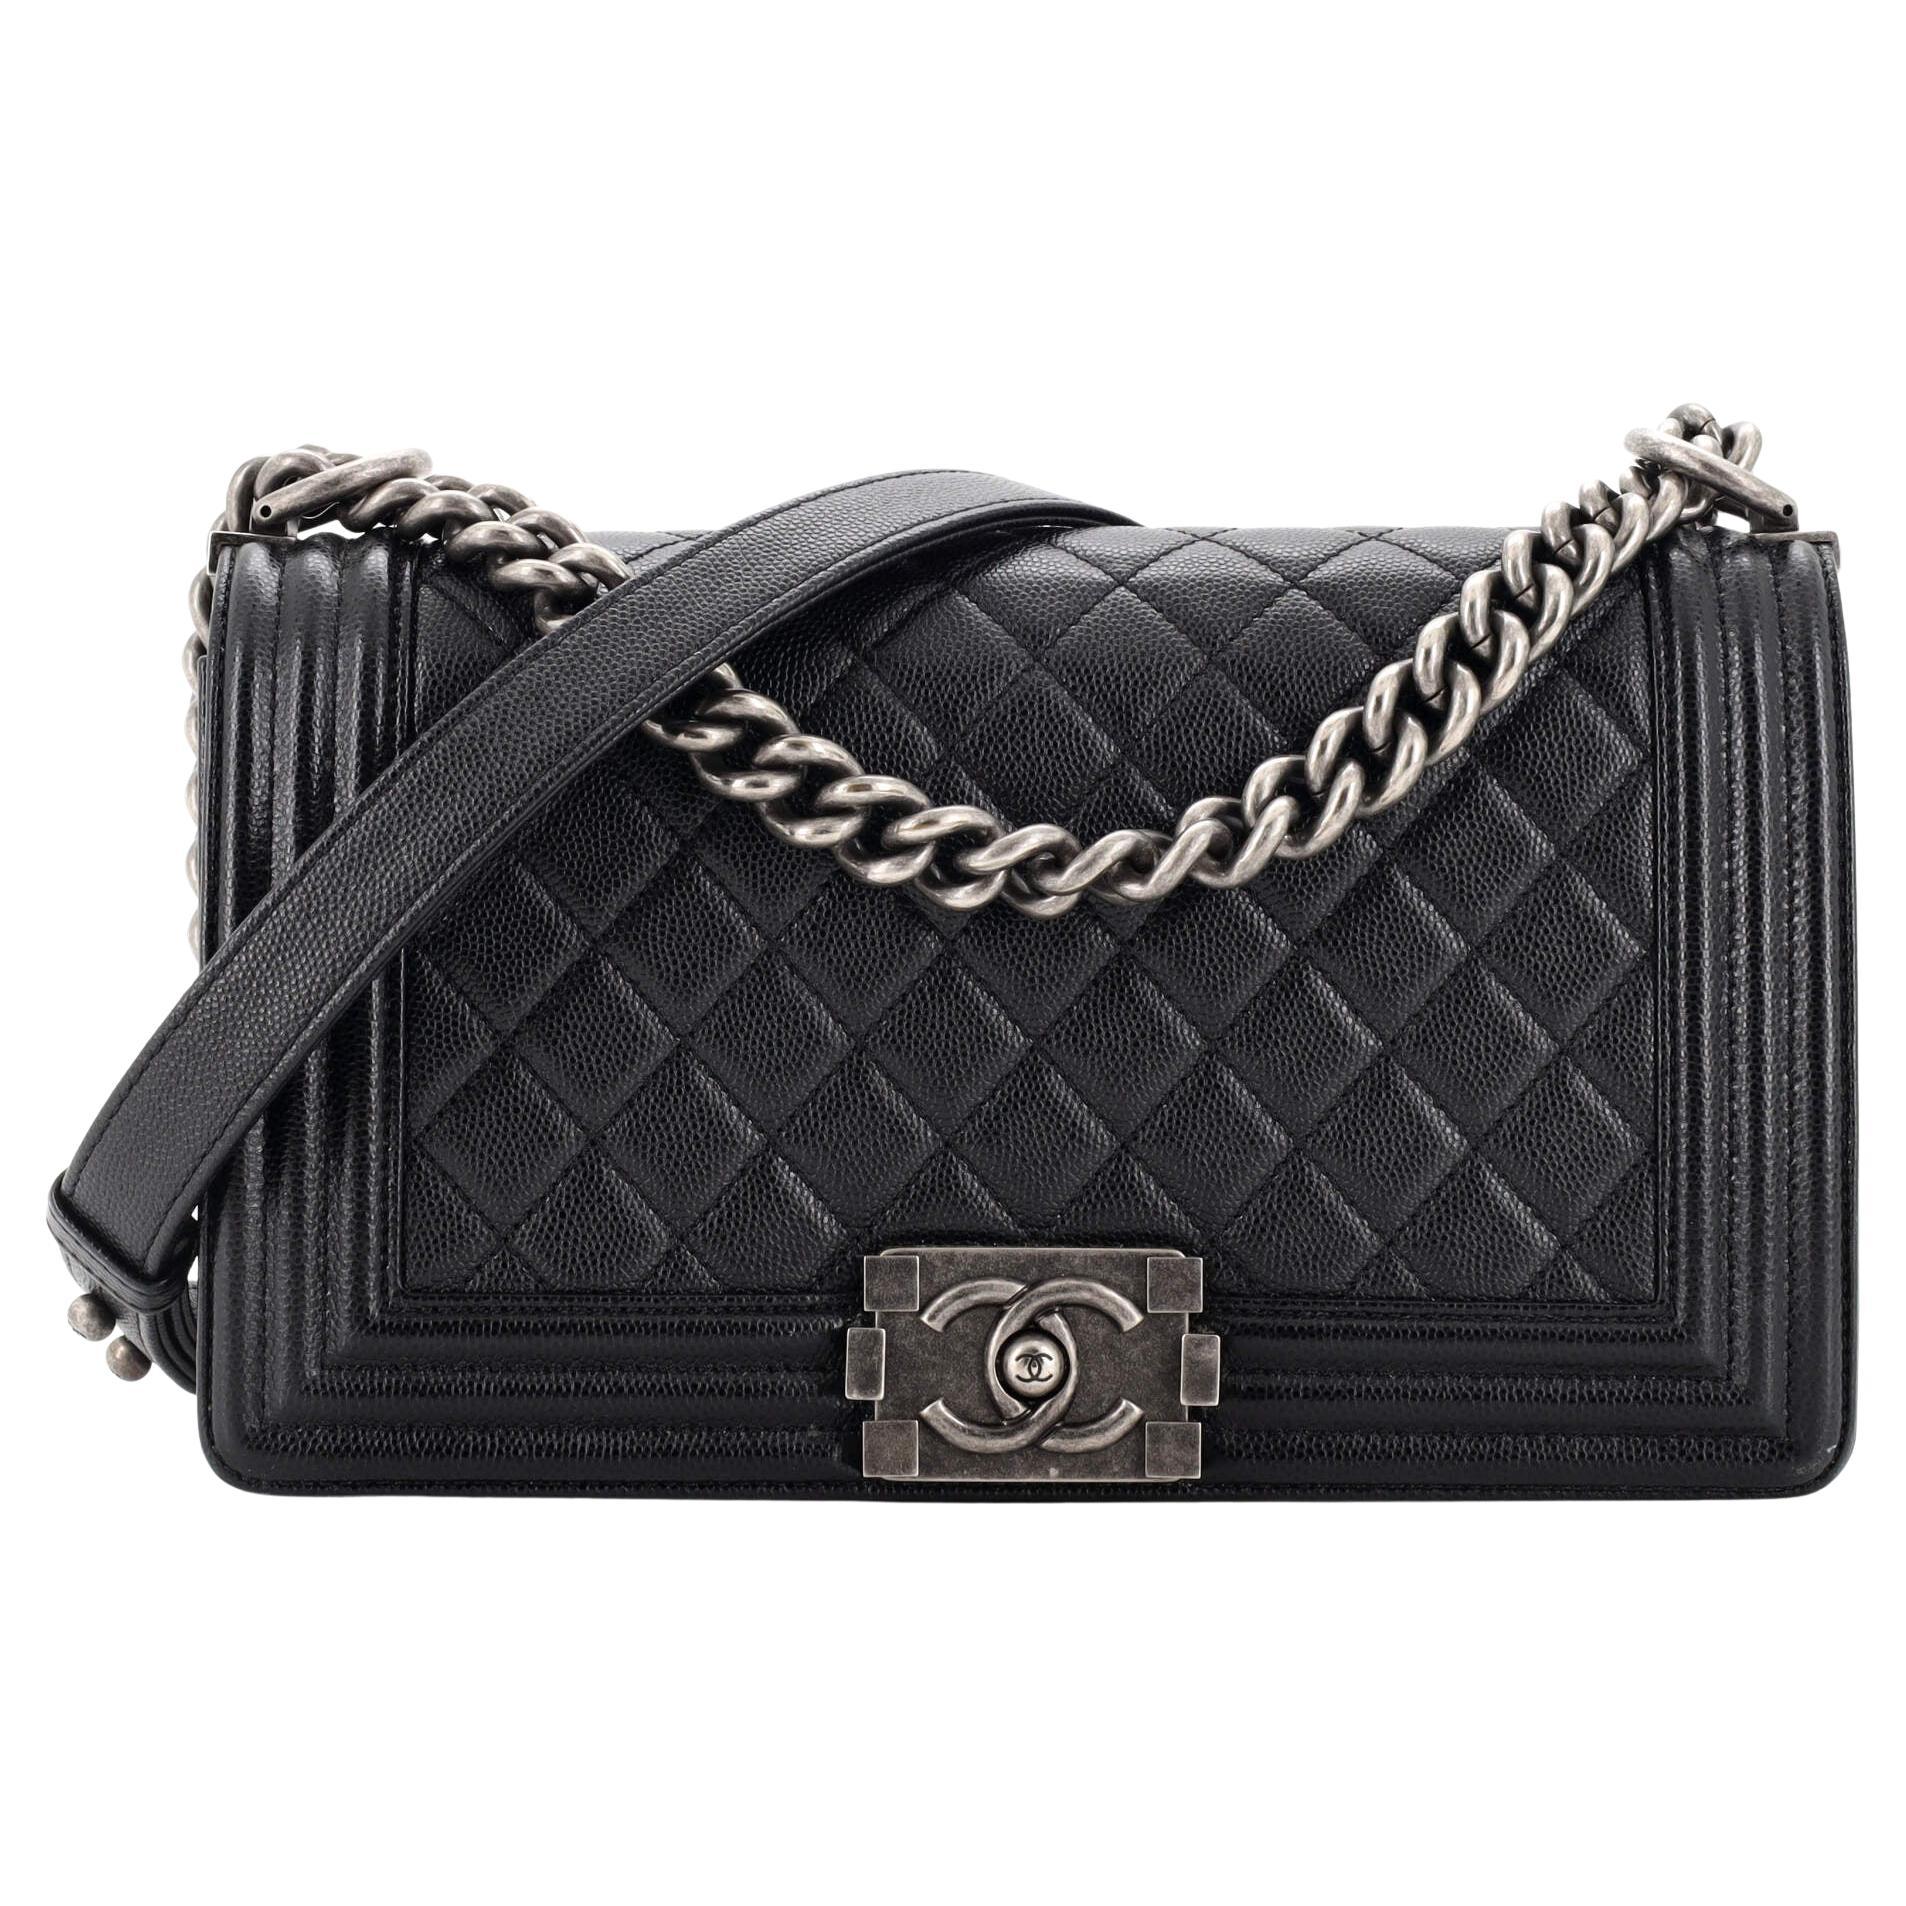 Long Flap Wallet or Boy Chanel variant? : r/chanel